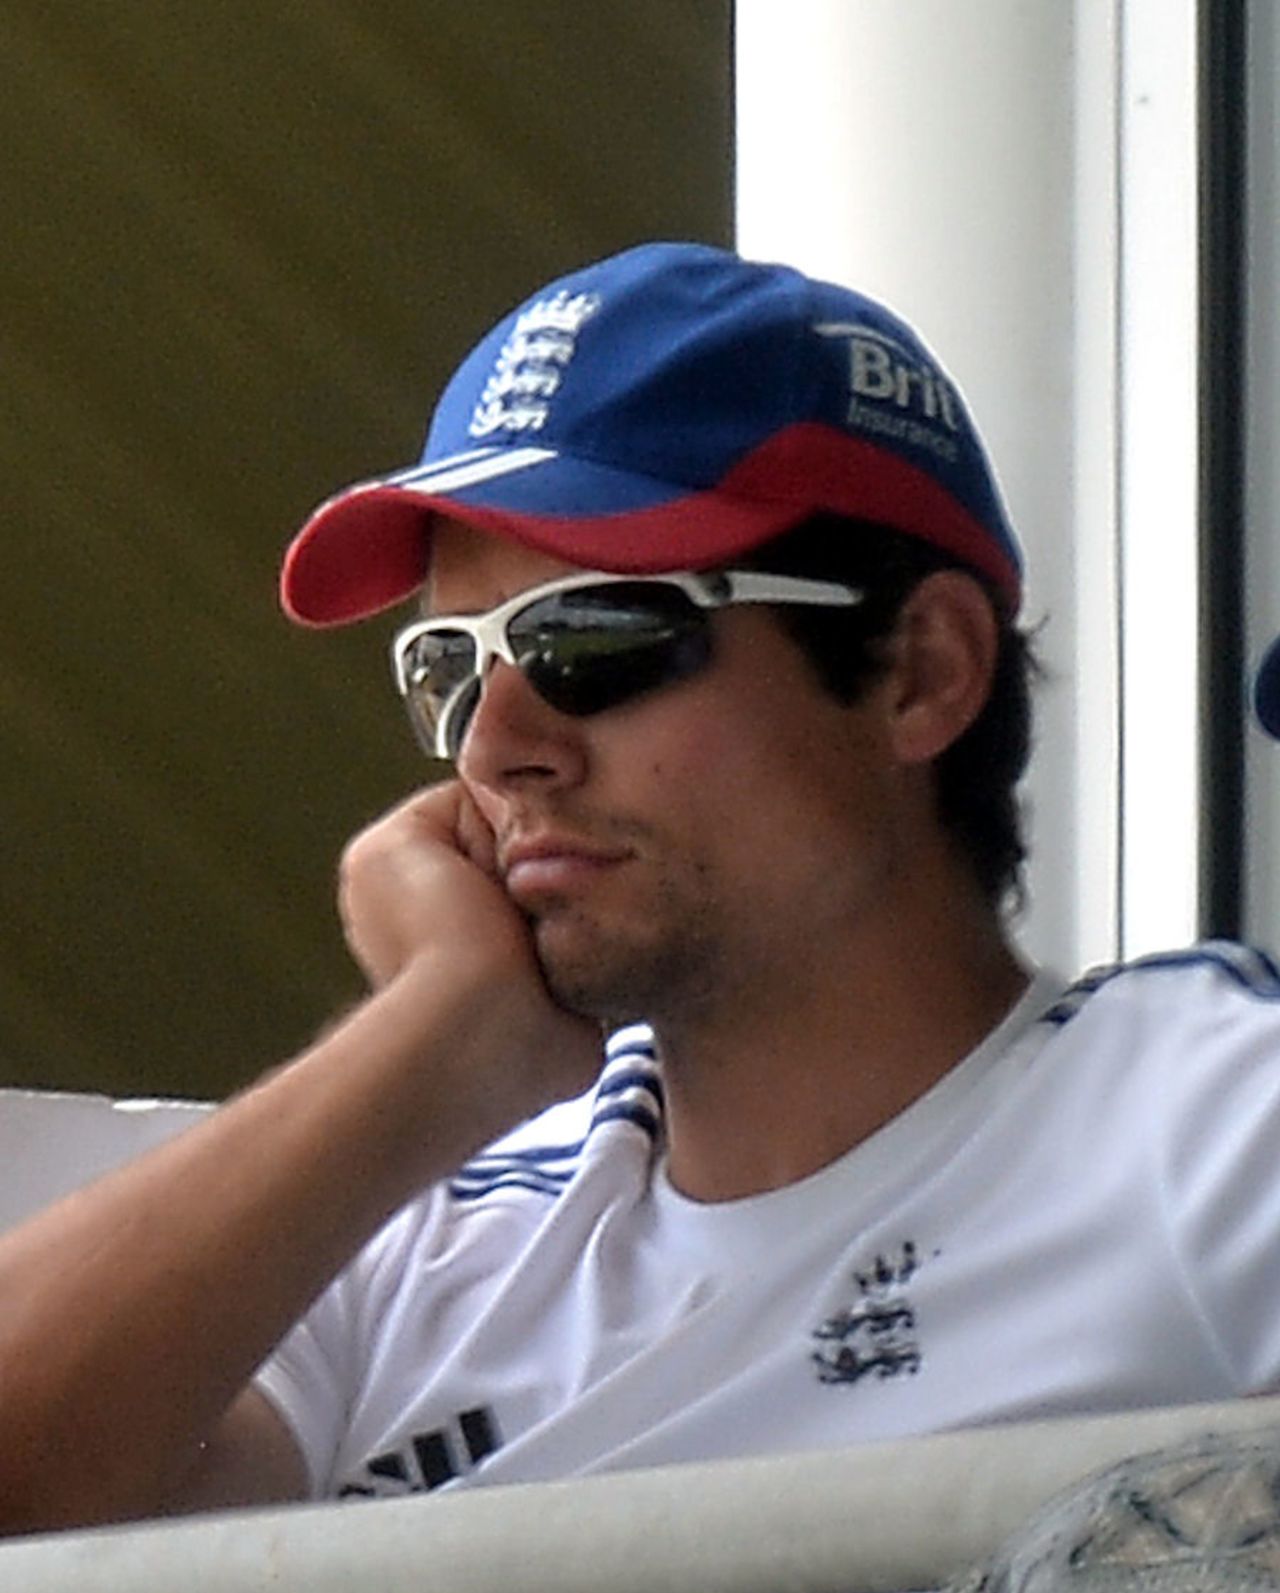 Alastair Cook, England captain, looks on as Australia move closer to regaining the Ashes in the third Test in Perth